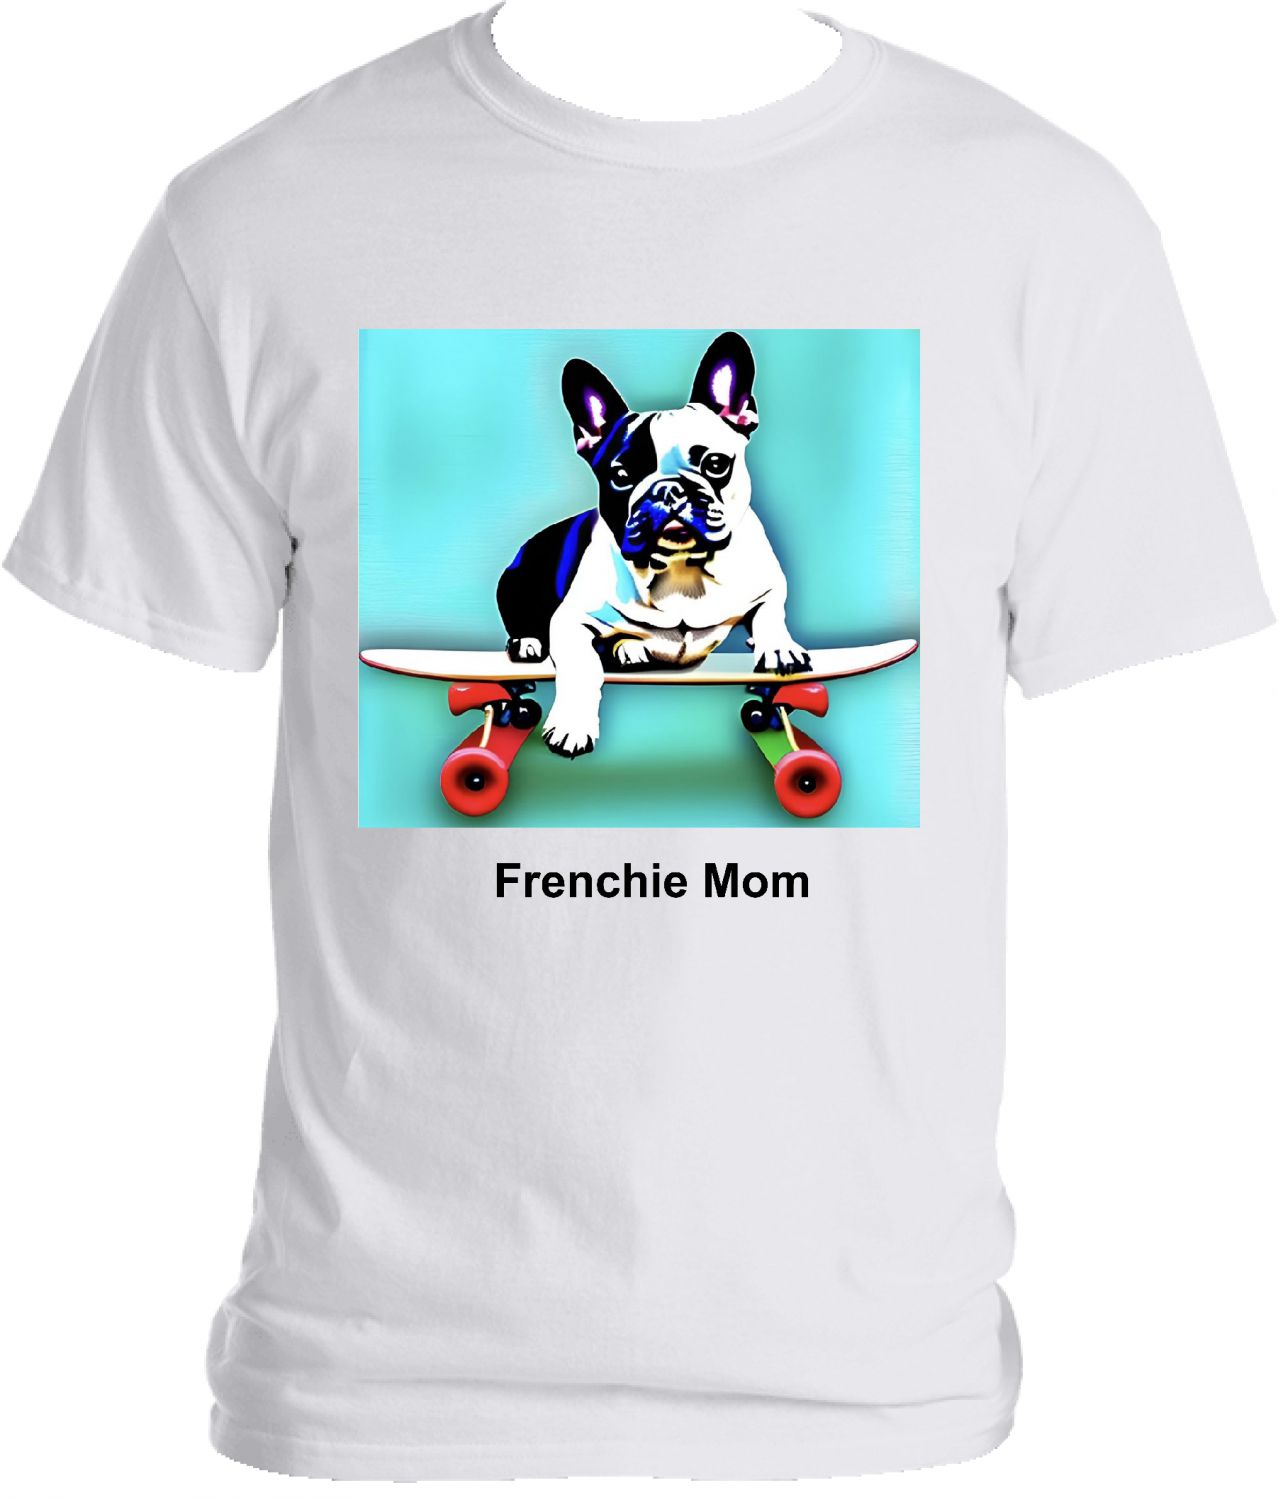 Frenchie on a Skateboard French Mom